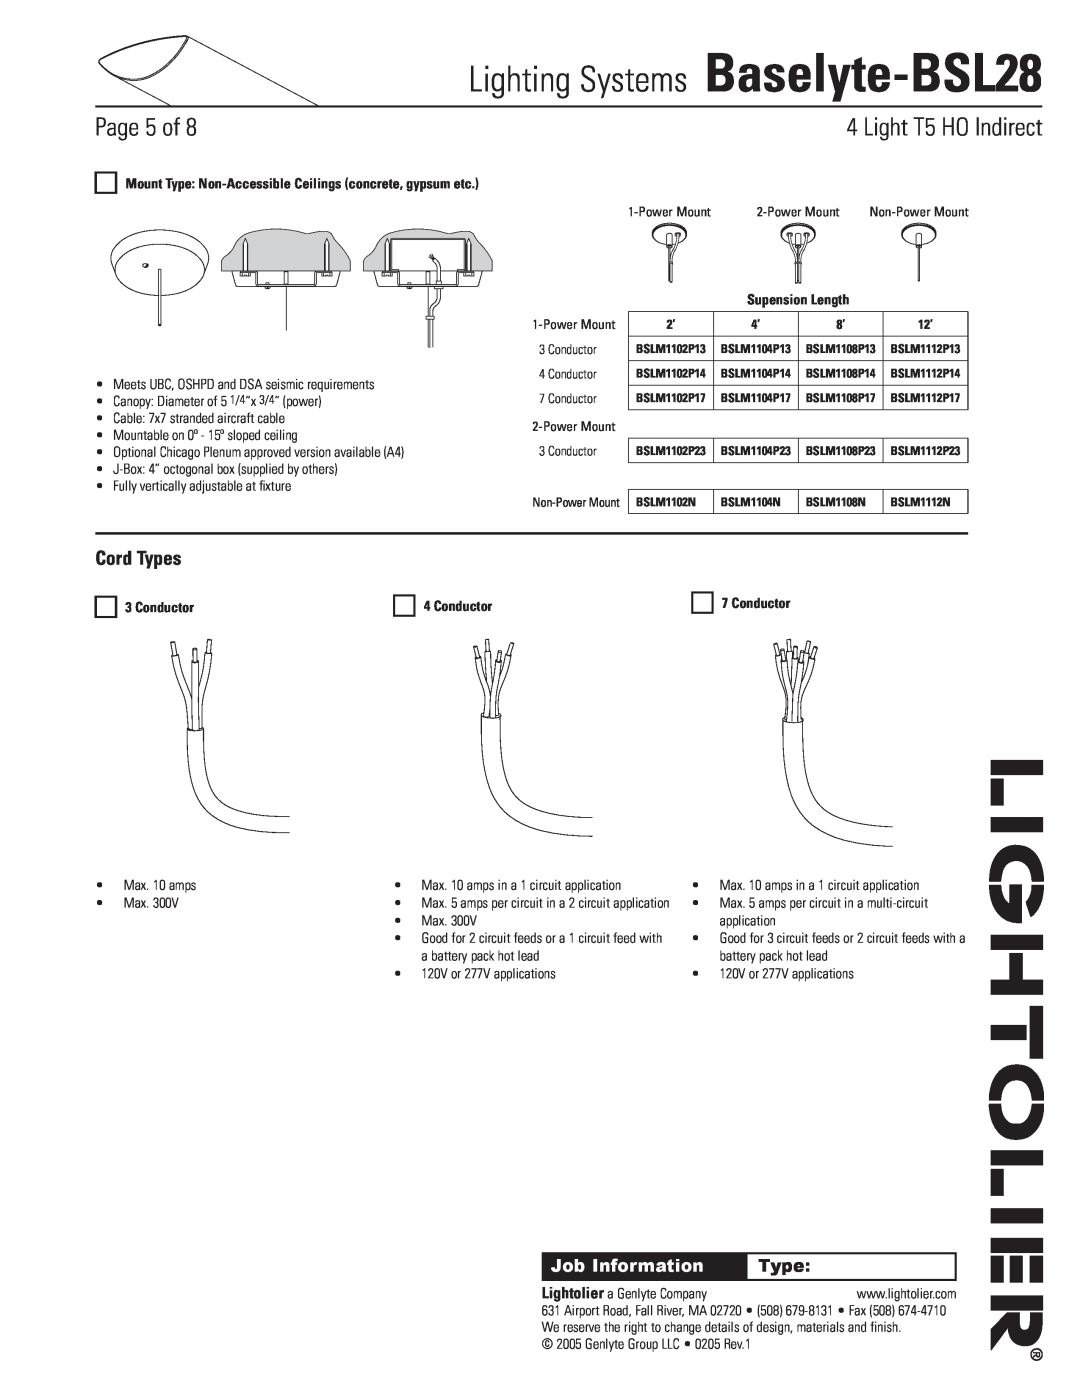 Lightolier Cord Types, Conductor, Lighting Systems Baselyte-BSL28, Page of, Light T5 HO Indirect, Job Information 